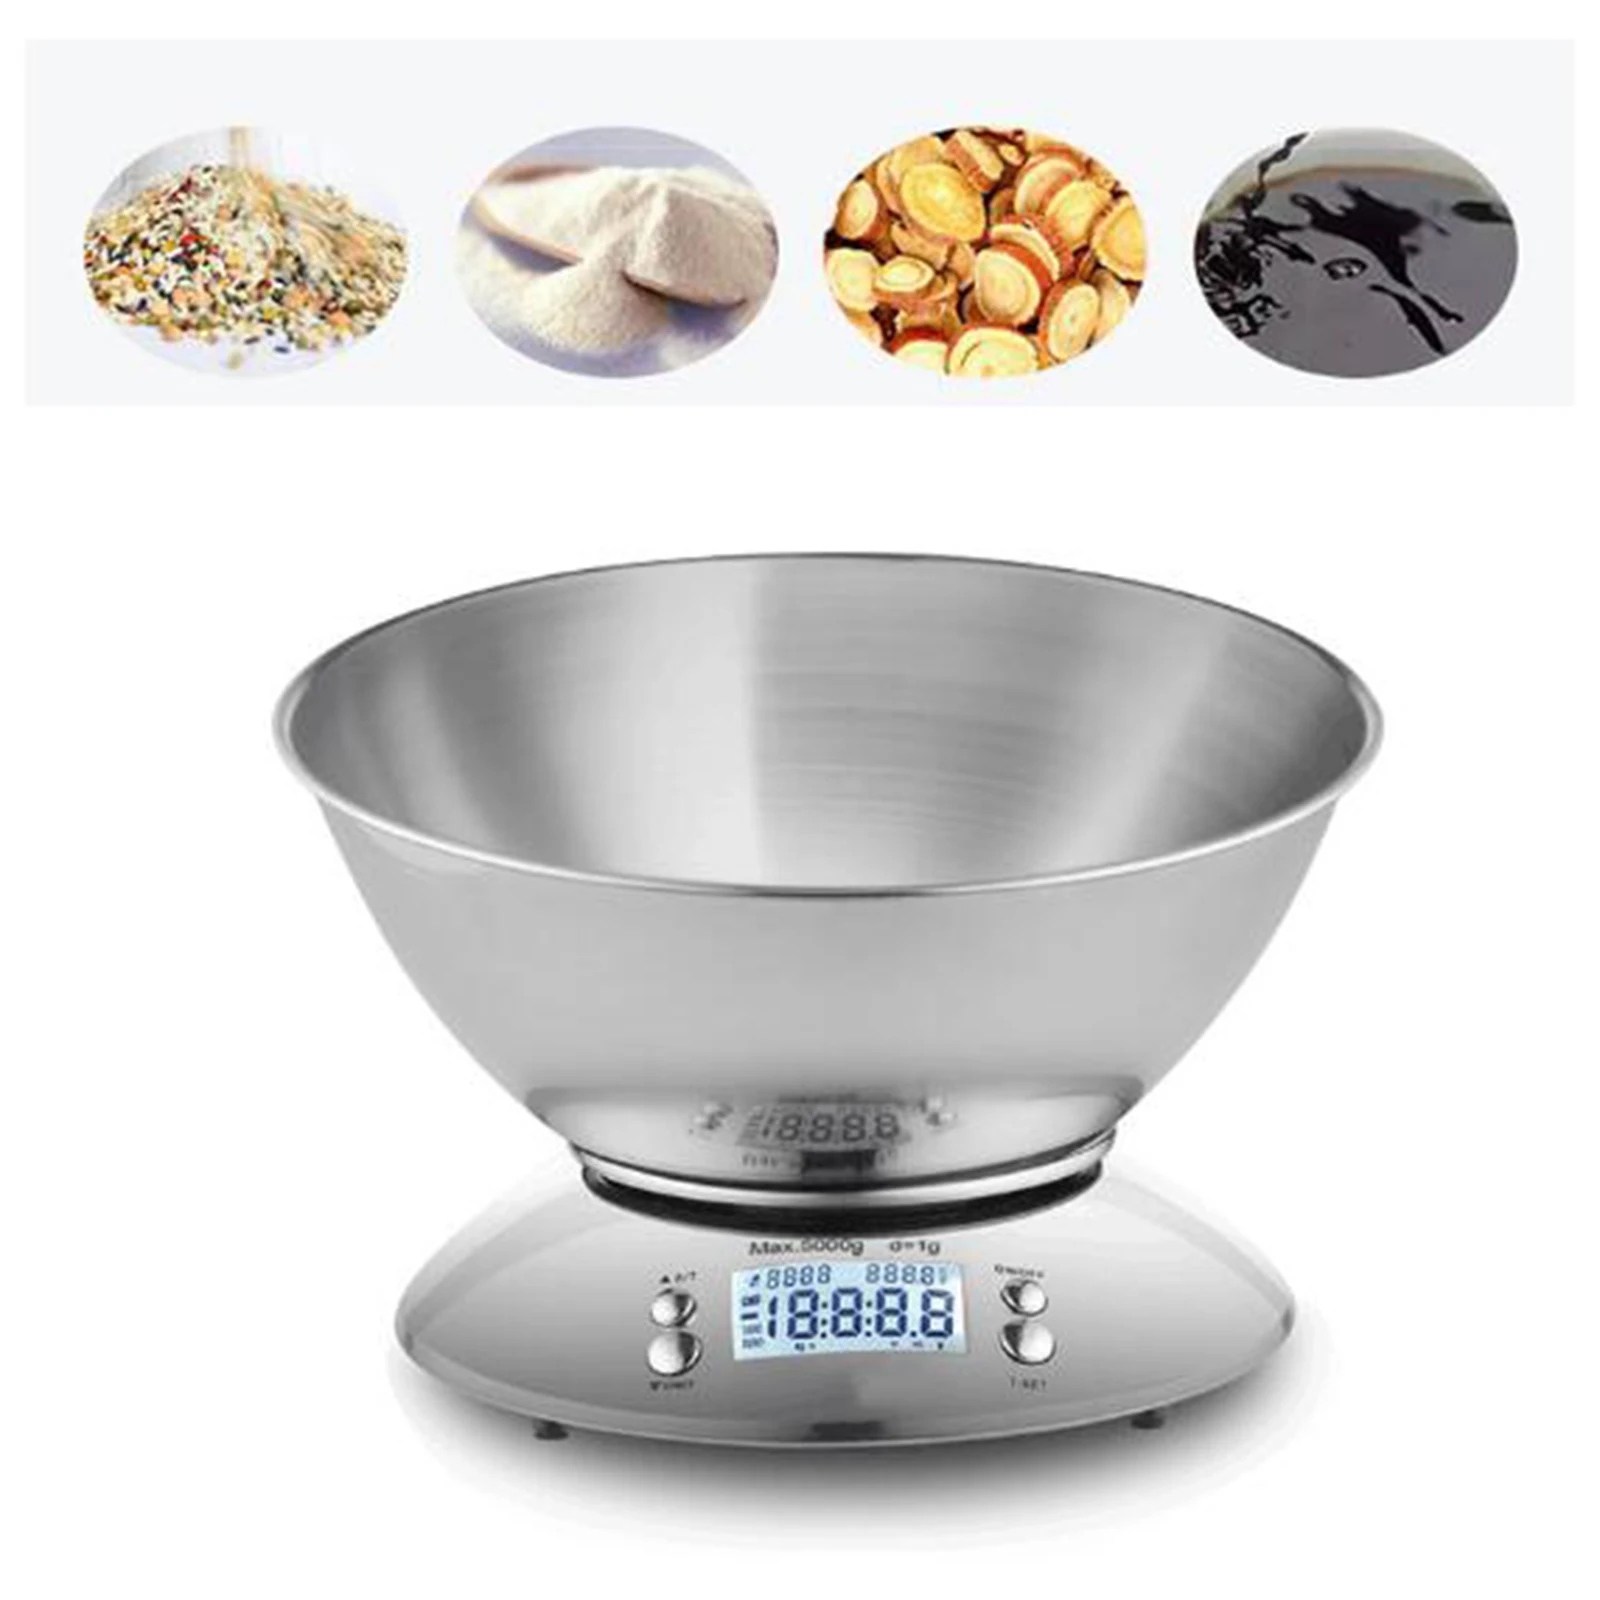 Digital Kitchen Food Scales Stainless Steel Weighing Cooking Scales With Detach 